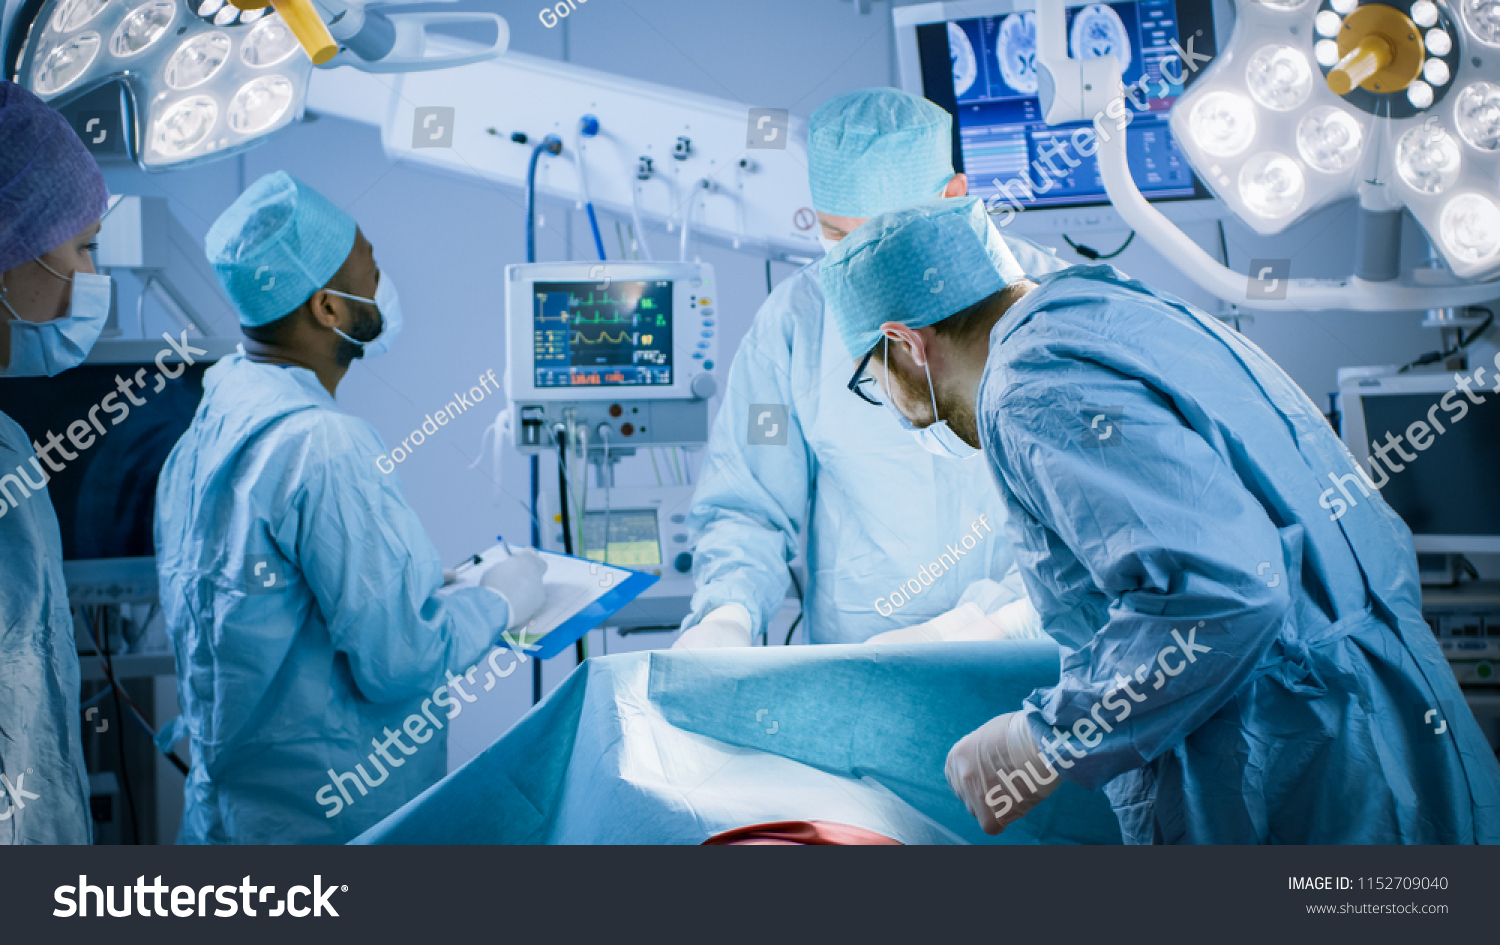 Diverse Team of Professional surgeon, Assistants and Nurses Performing Invasive Surgery on a Patient in the Hospital Operating Room. Real Modern Hospital with Authentic Equipment. #1152709040